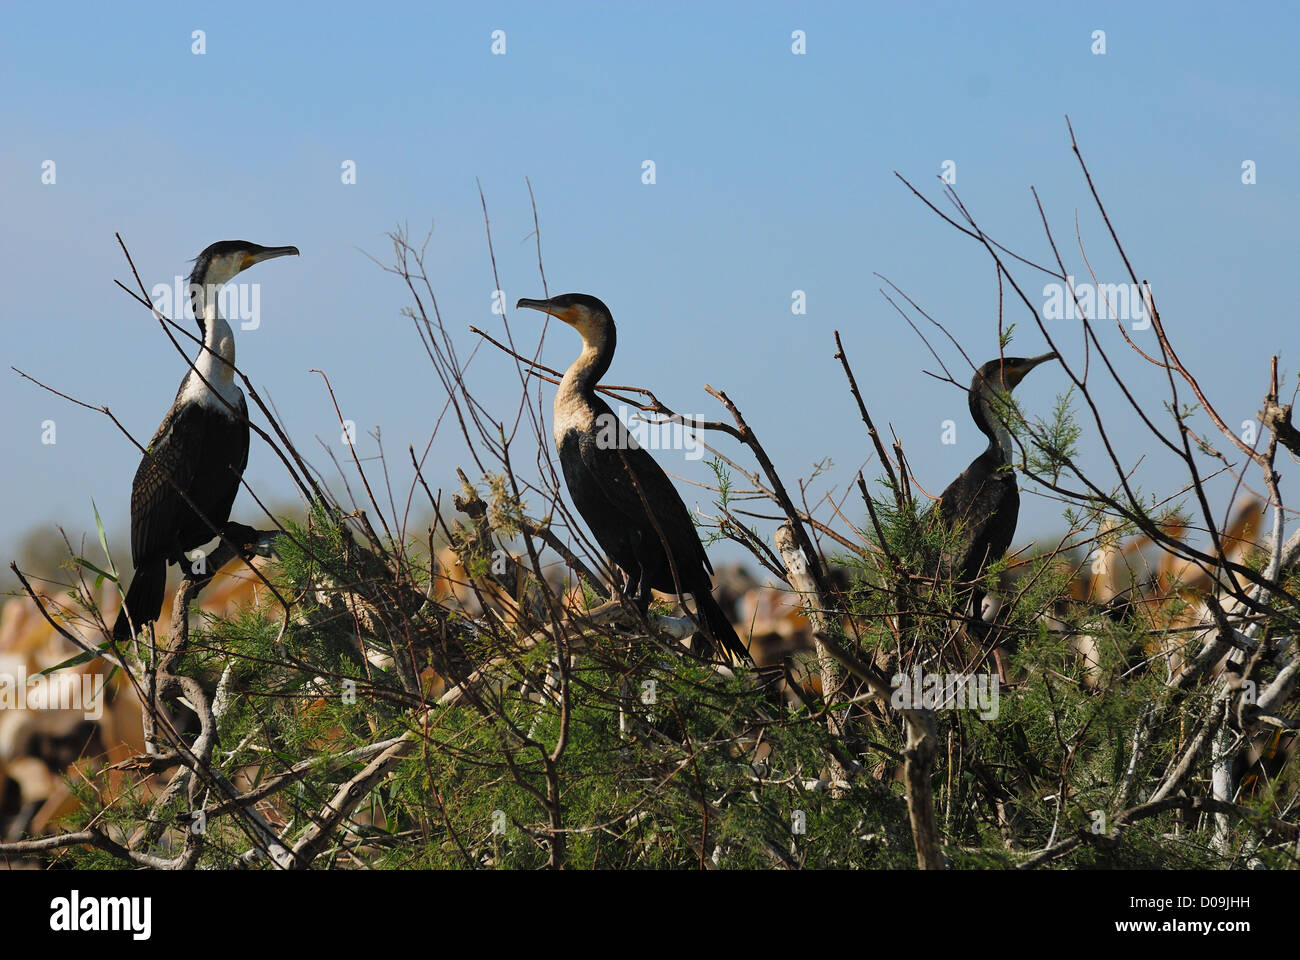 A cormoran colony, at the djoudj reserve, Senegal, Africa Stock Photo